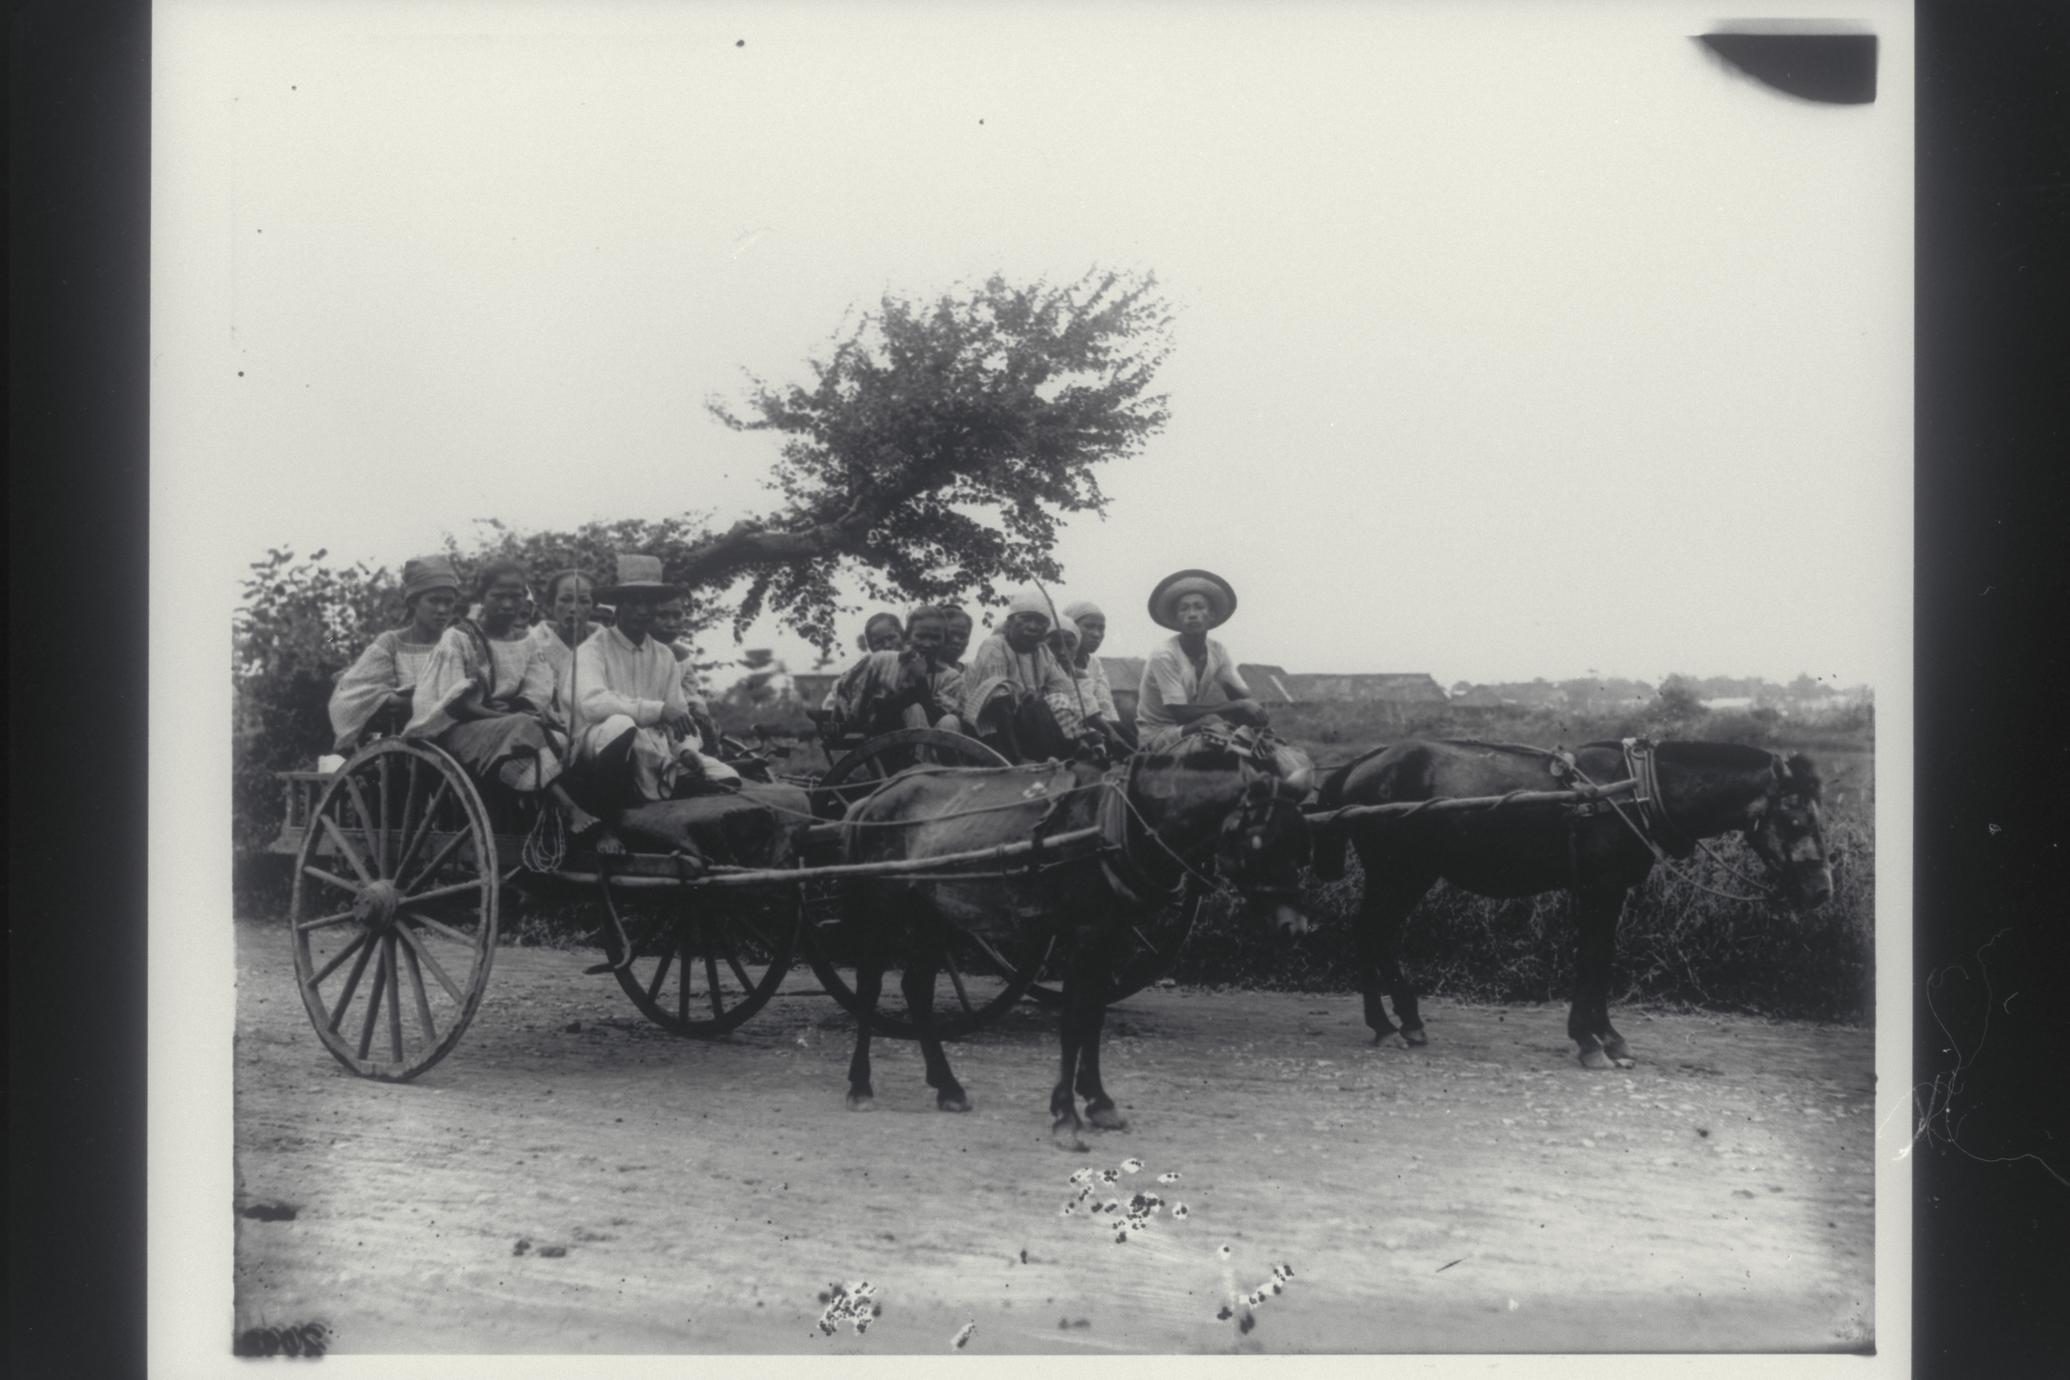 Peasants traveling in bull carts, Manila, early 1900s